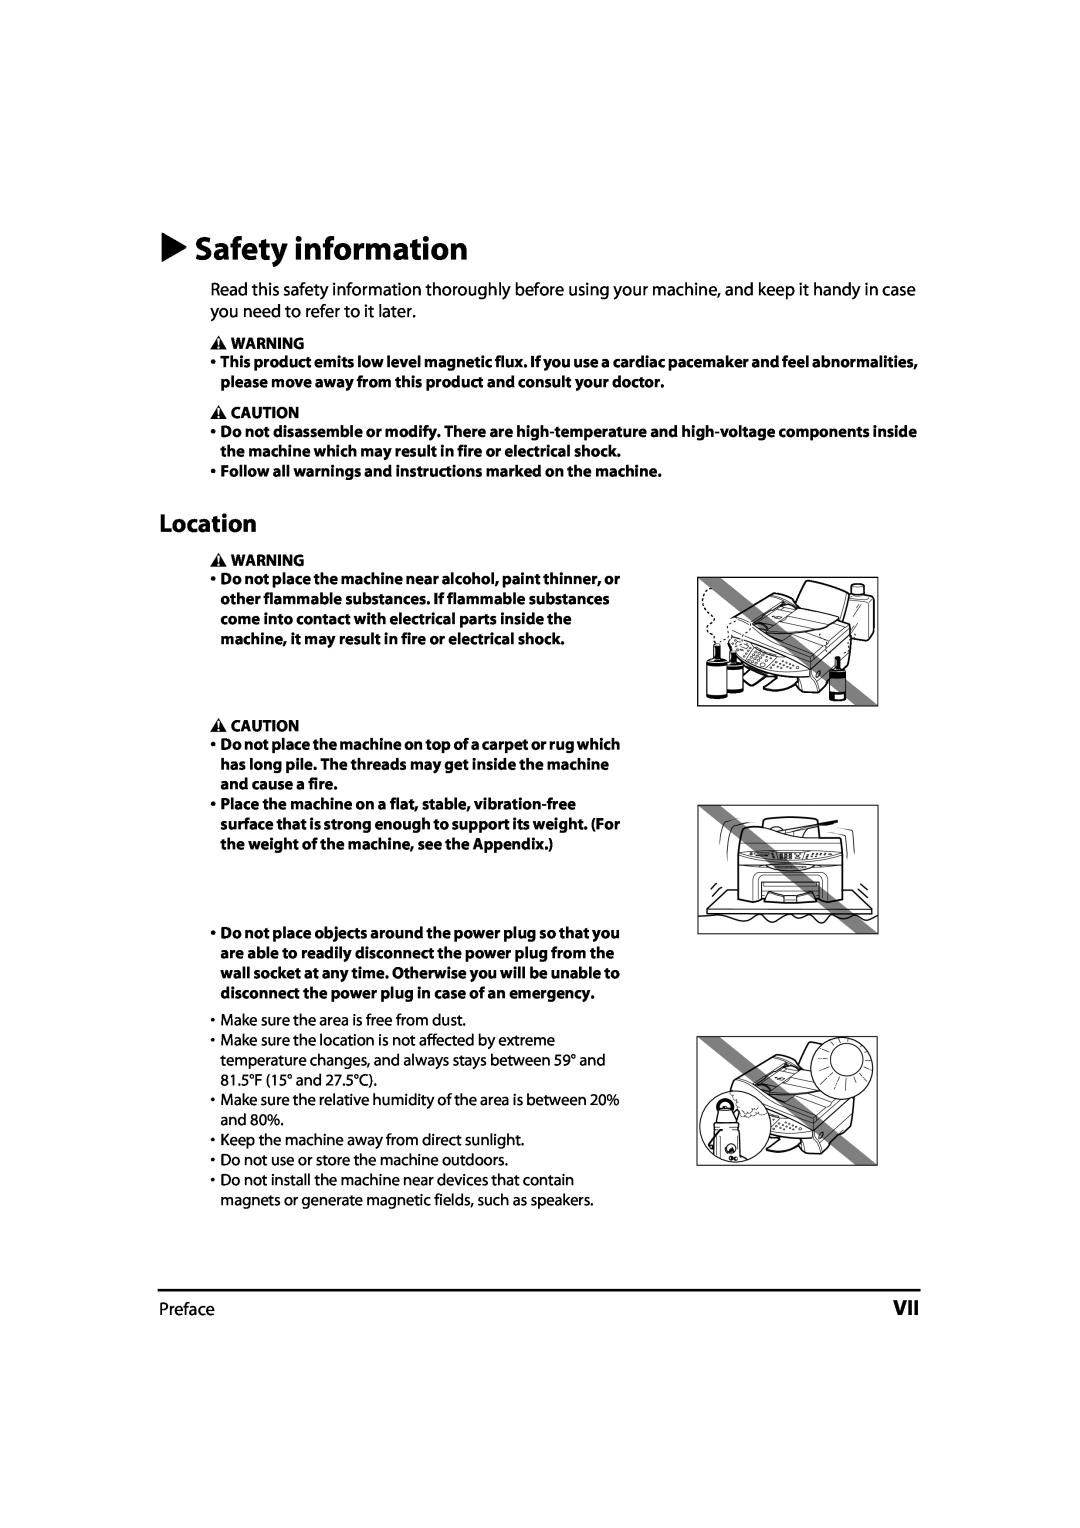 Canon MP700, 730i, MultiPASS MP730 manual Safety information, Location 